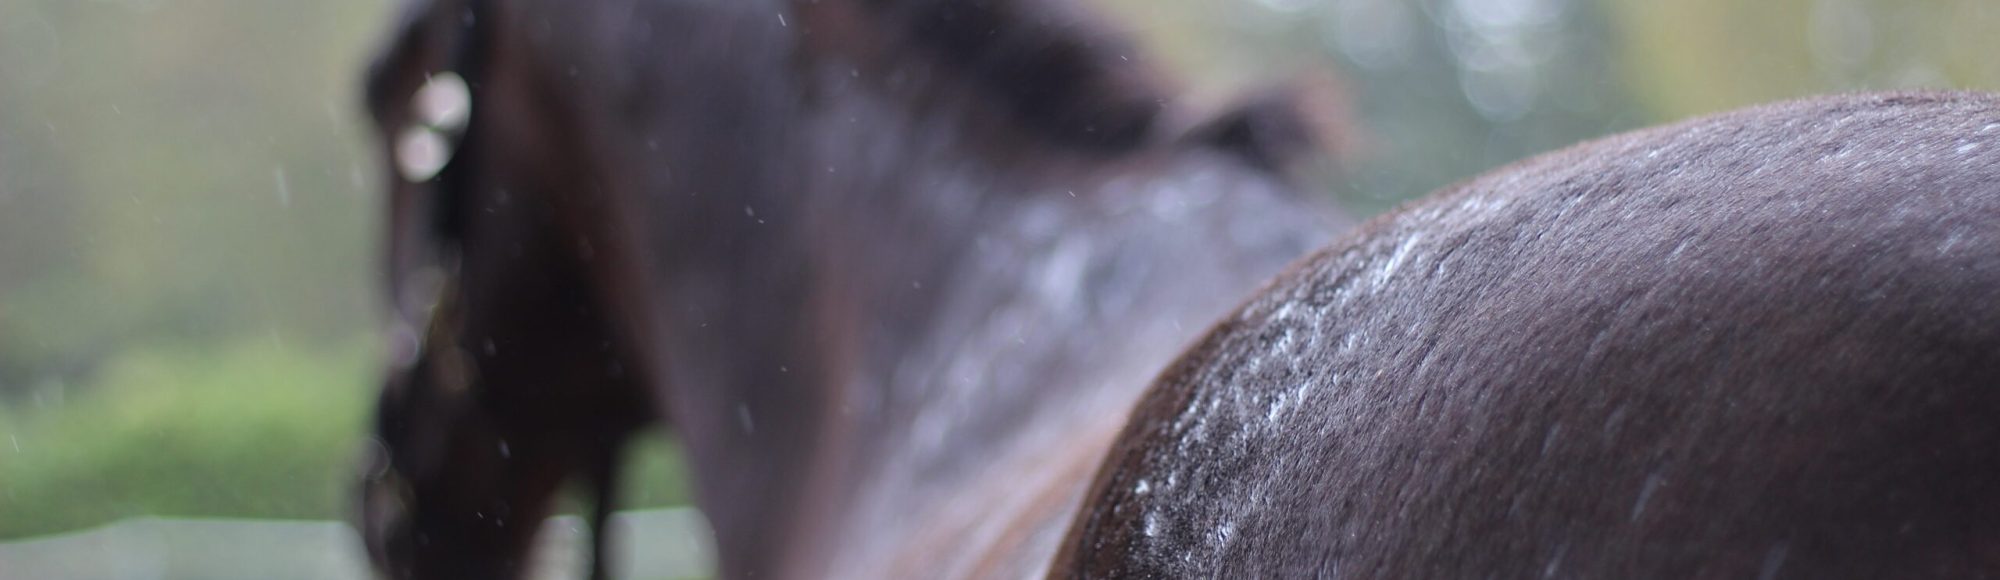 Liver chestnut Warmblood Horse standing in the rain